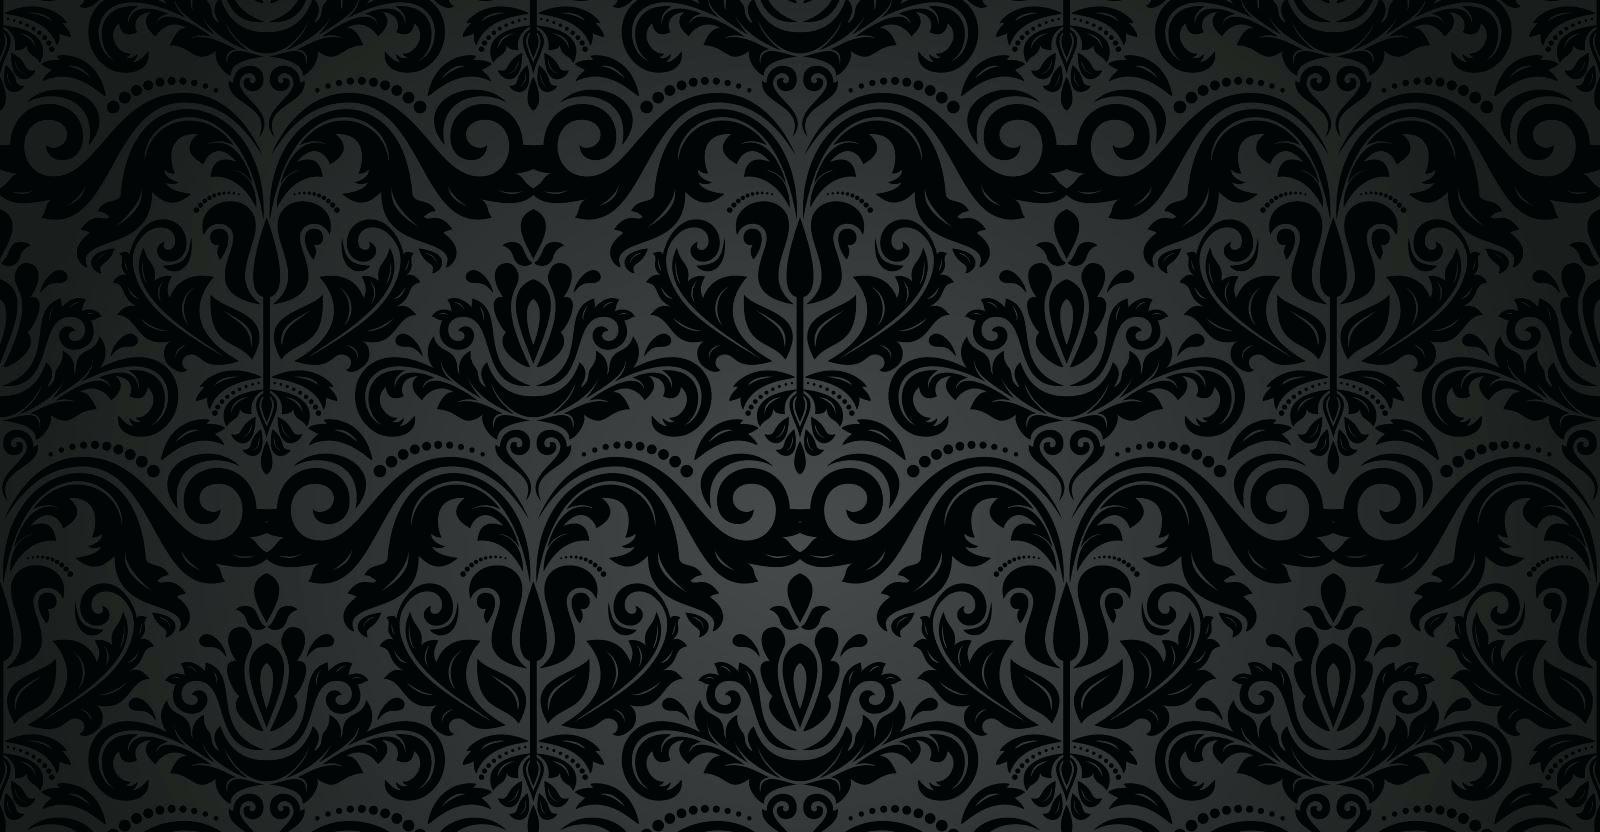 Jaamso Royals Gold and Black DamarkRemovable Peel and Stick Wallpaper Wall  Sticker Wall Décor200 CM 45 CM   Amazonin Home Improvement